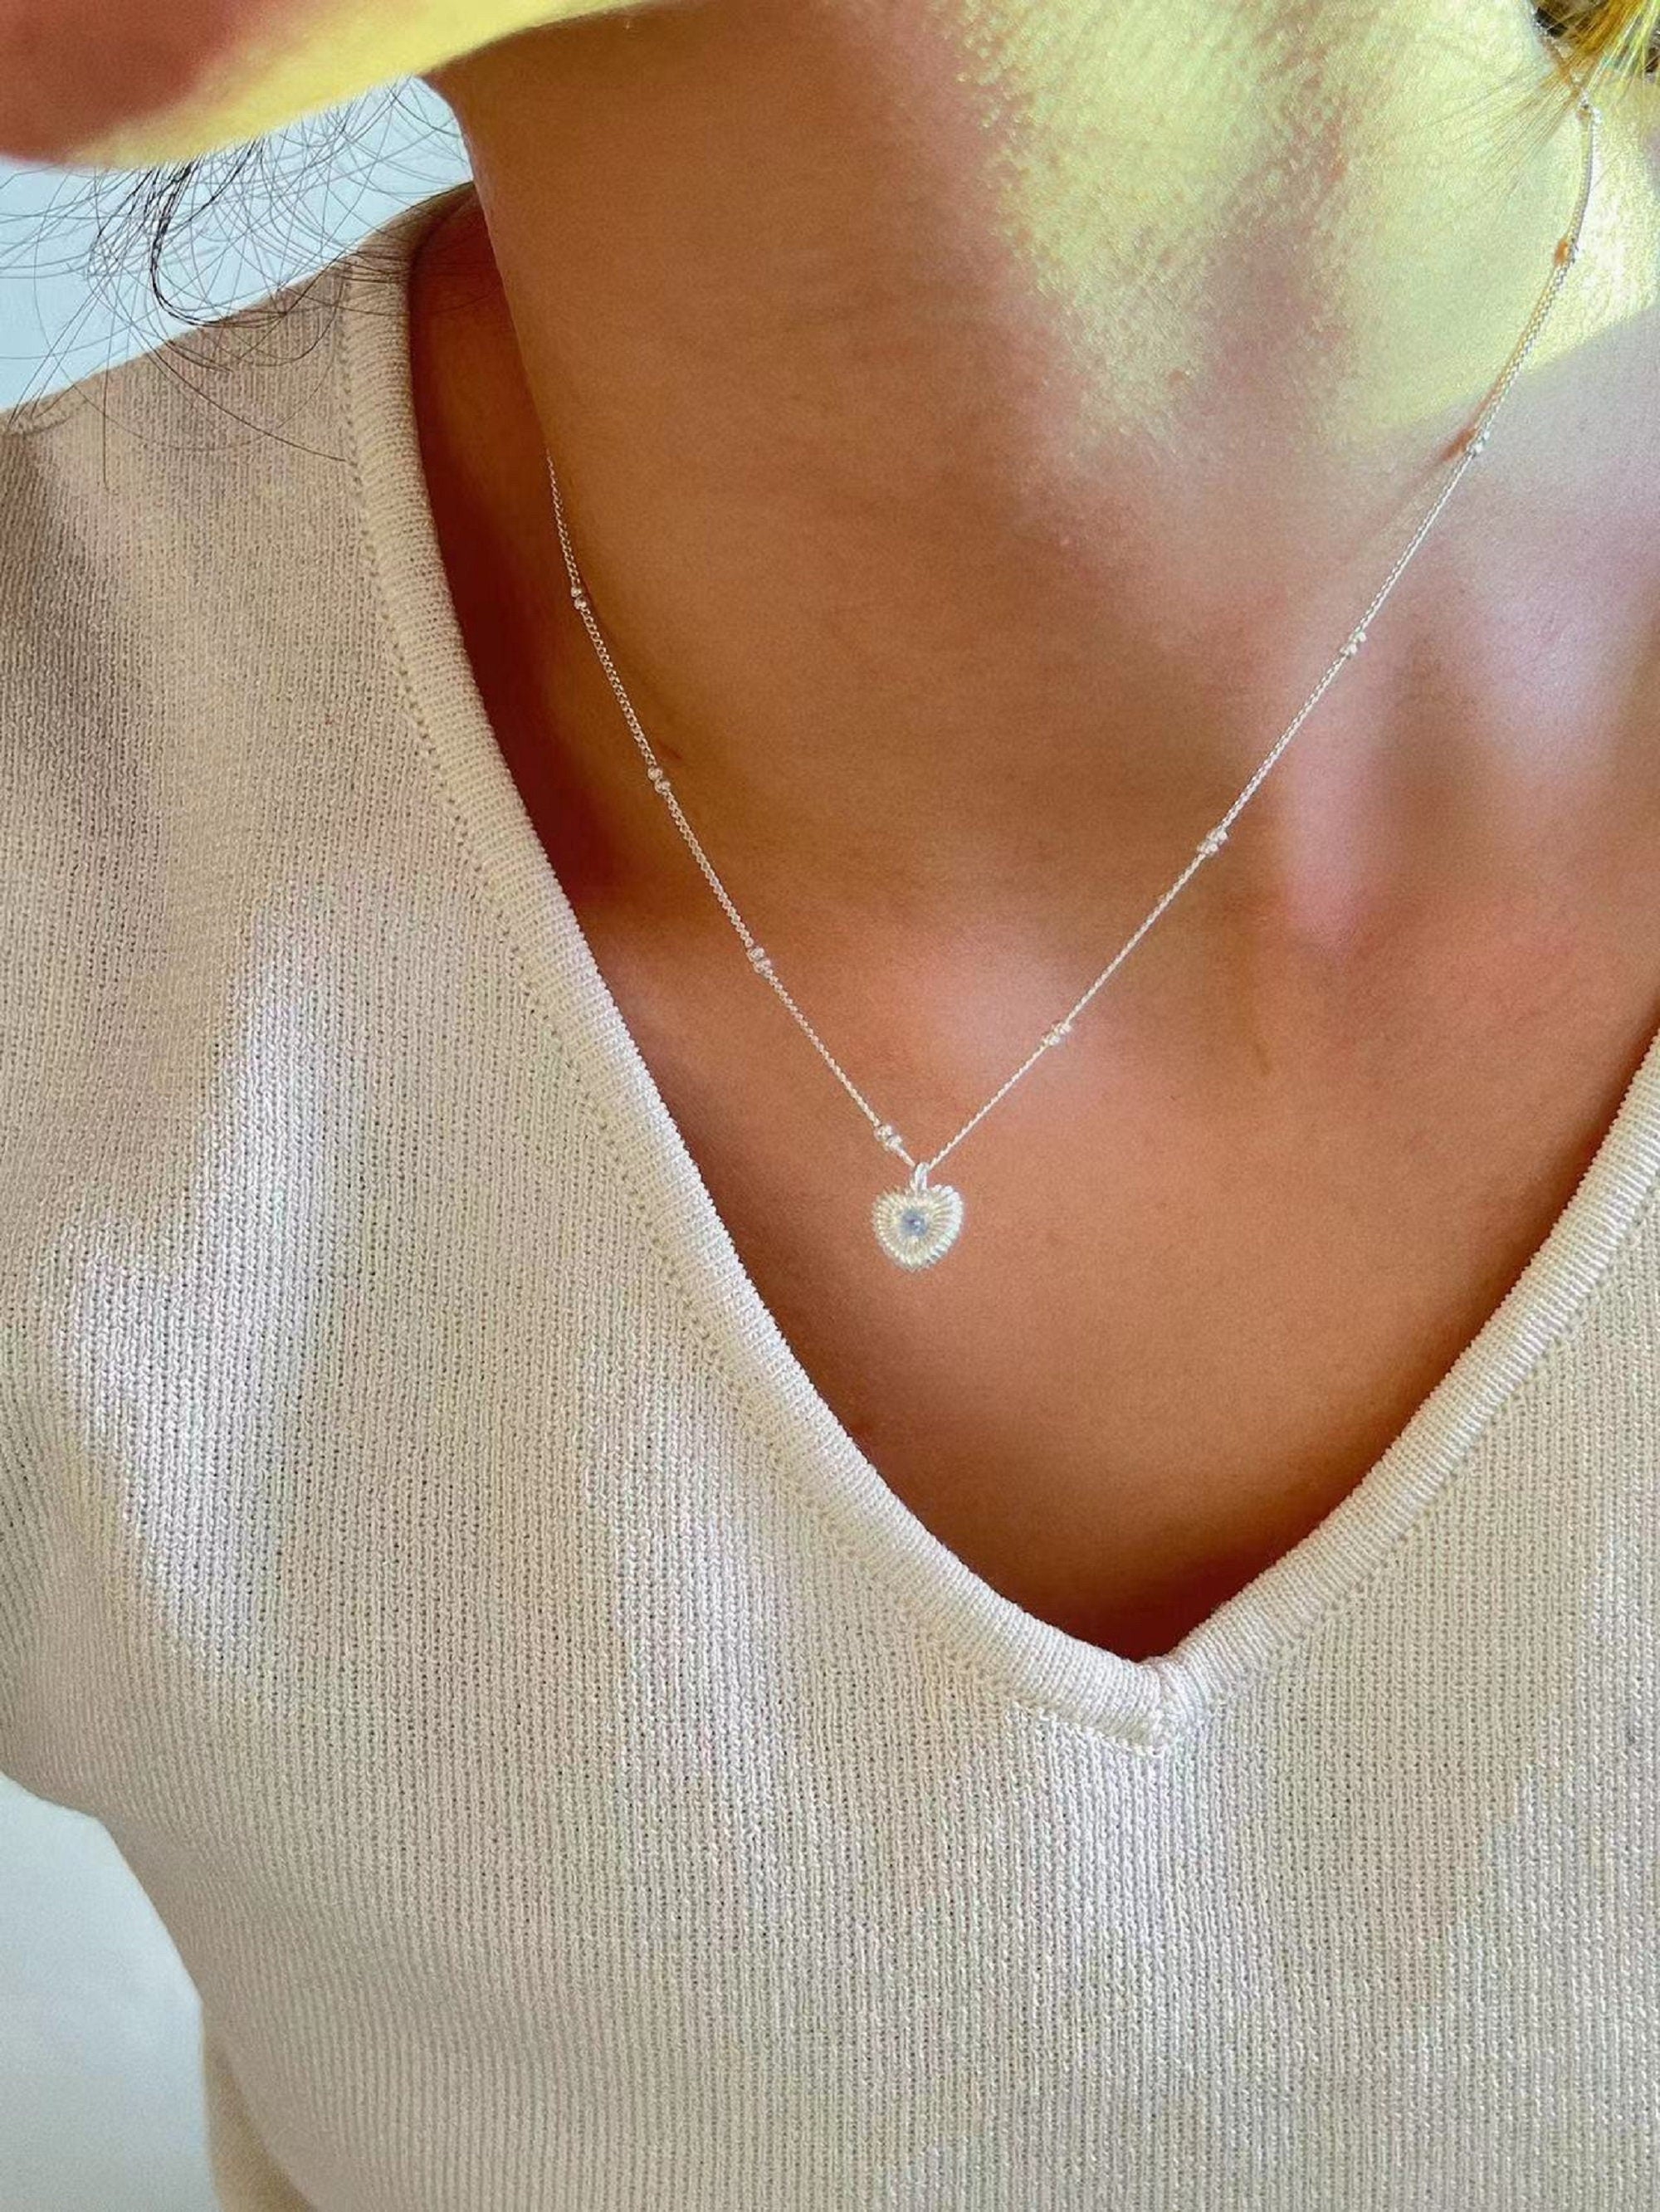 Sterling Silver Layered Necklace Set, Dainty Layered 925 Silver Necklace,  Set of 3 Layers Necklace, Layered Necklace Sterling Silver. - Etsy